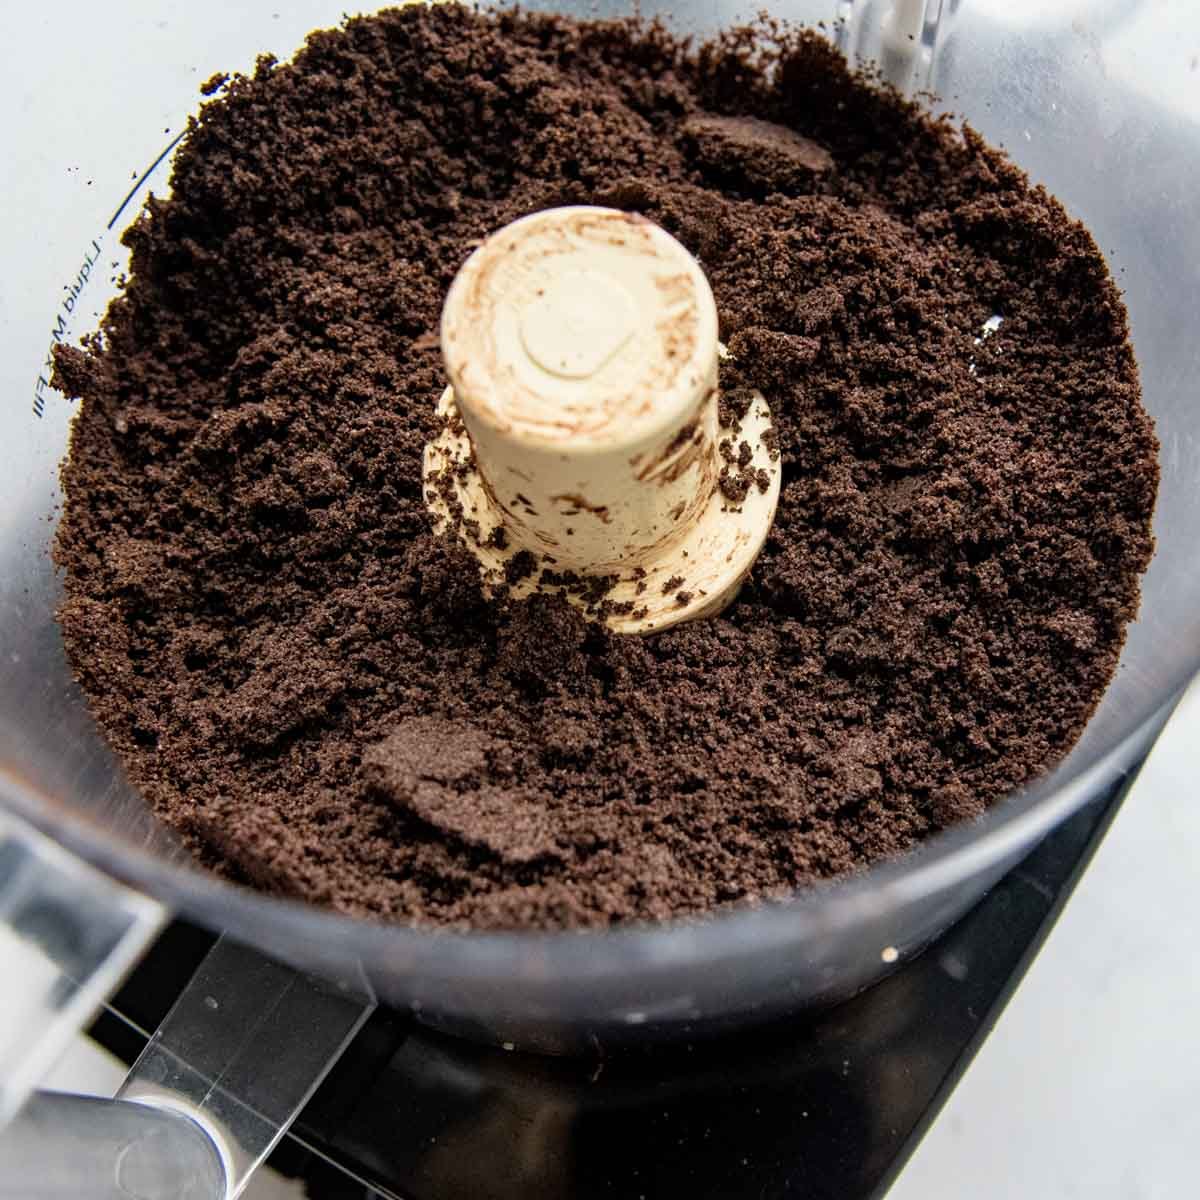 crushed Oreos in a food processor